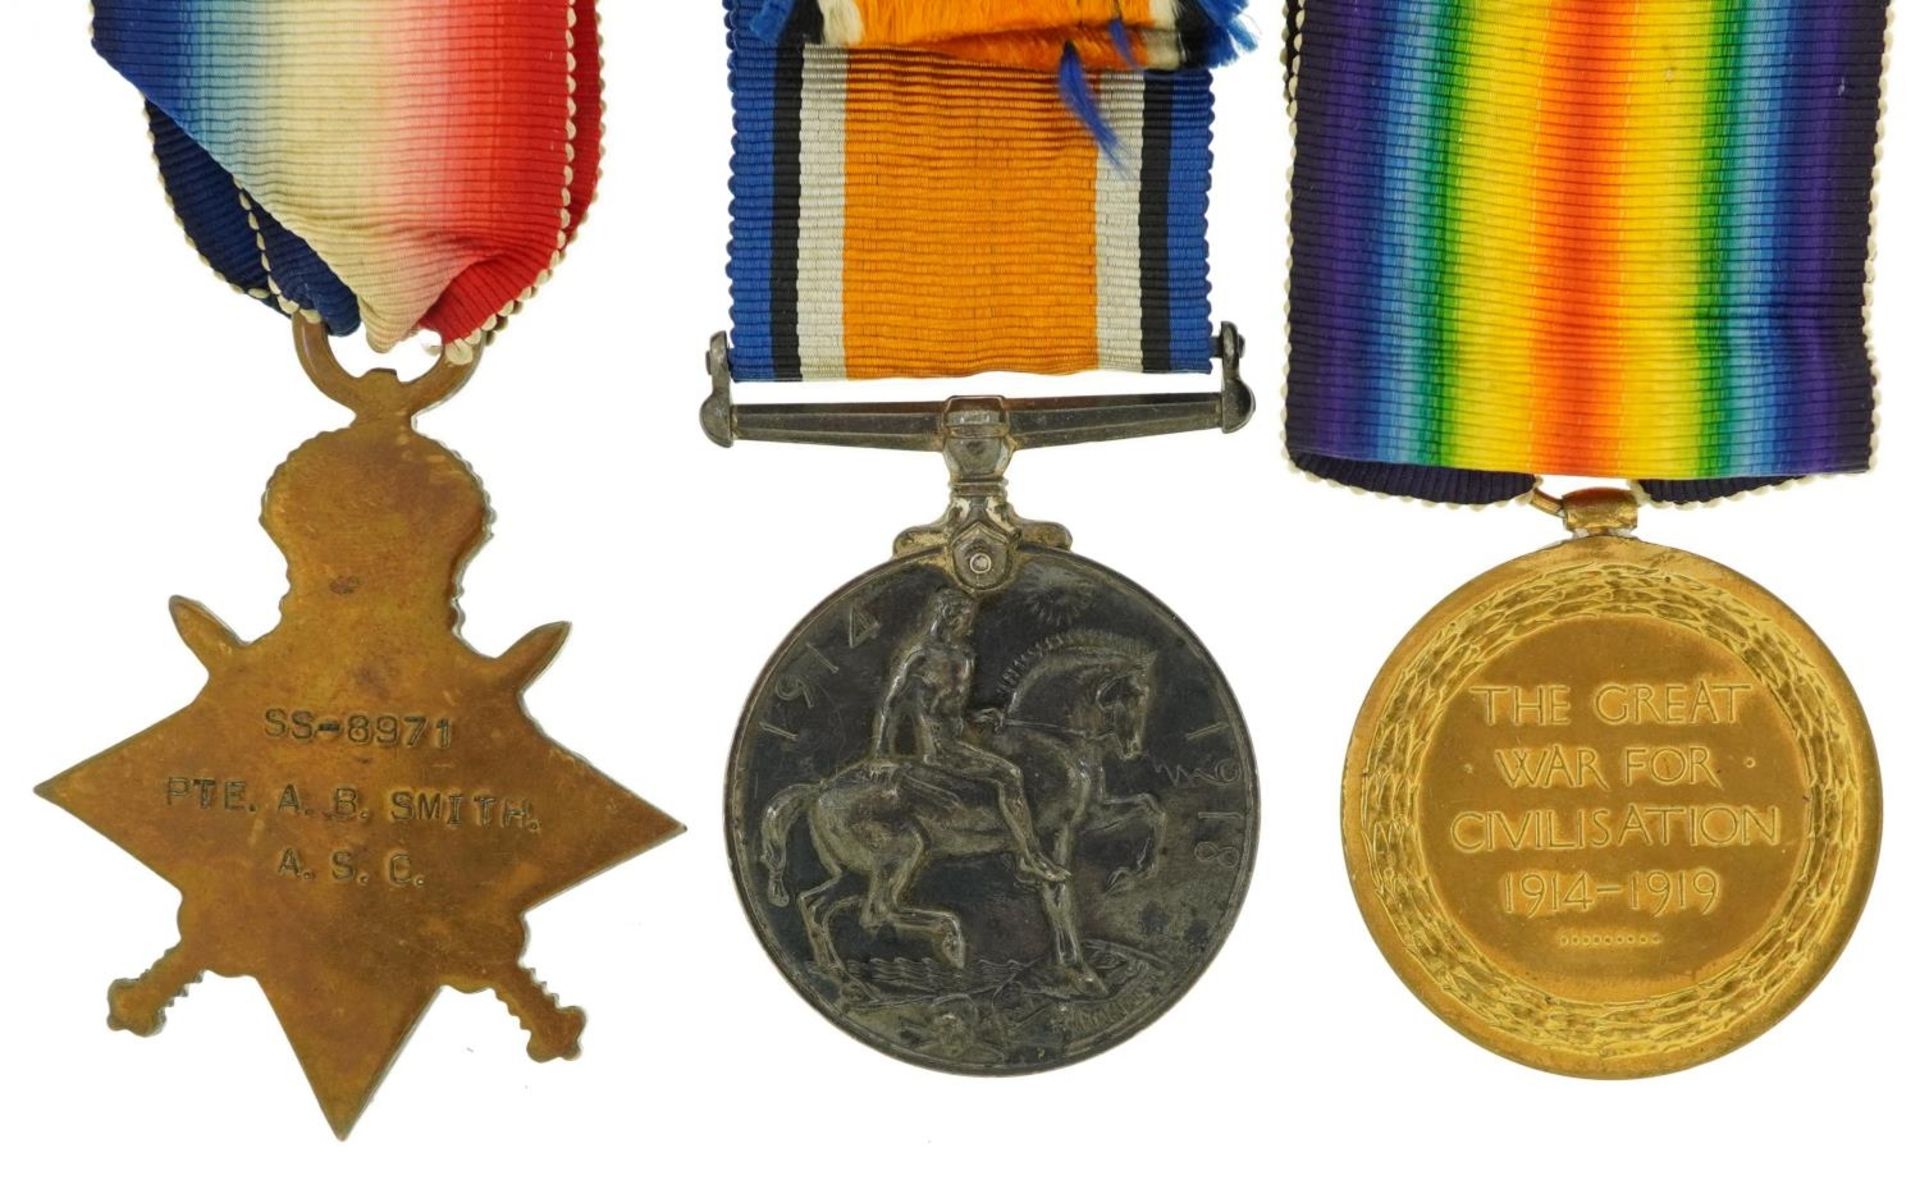 British military World War I trio awarded to 8971PTE.A.B.SMITH.A.S.C. - Image 3 of 5